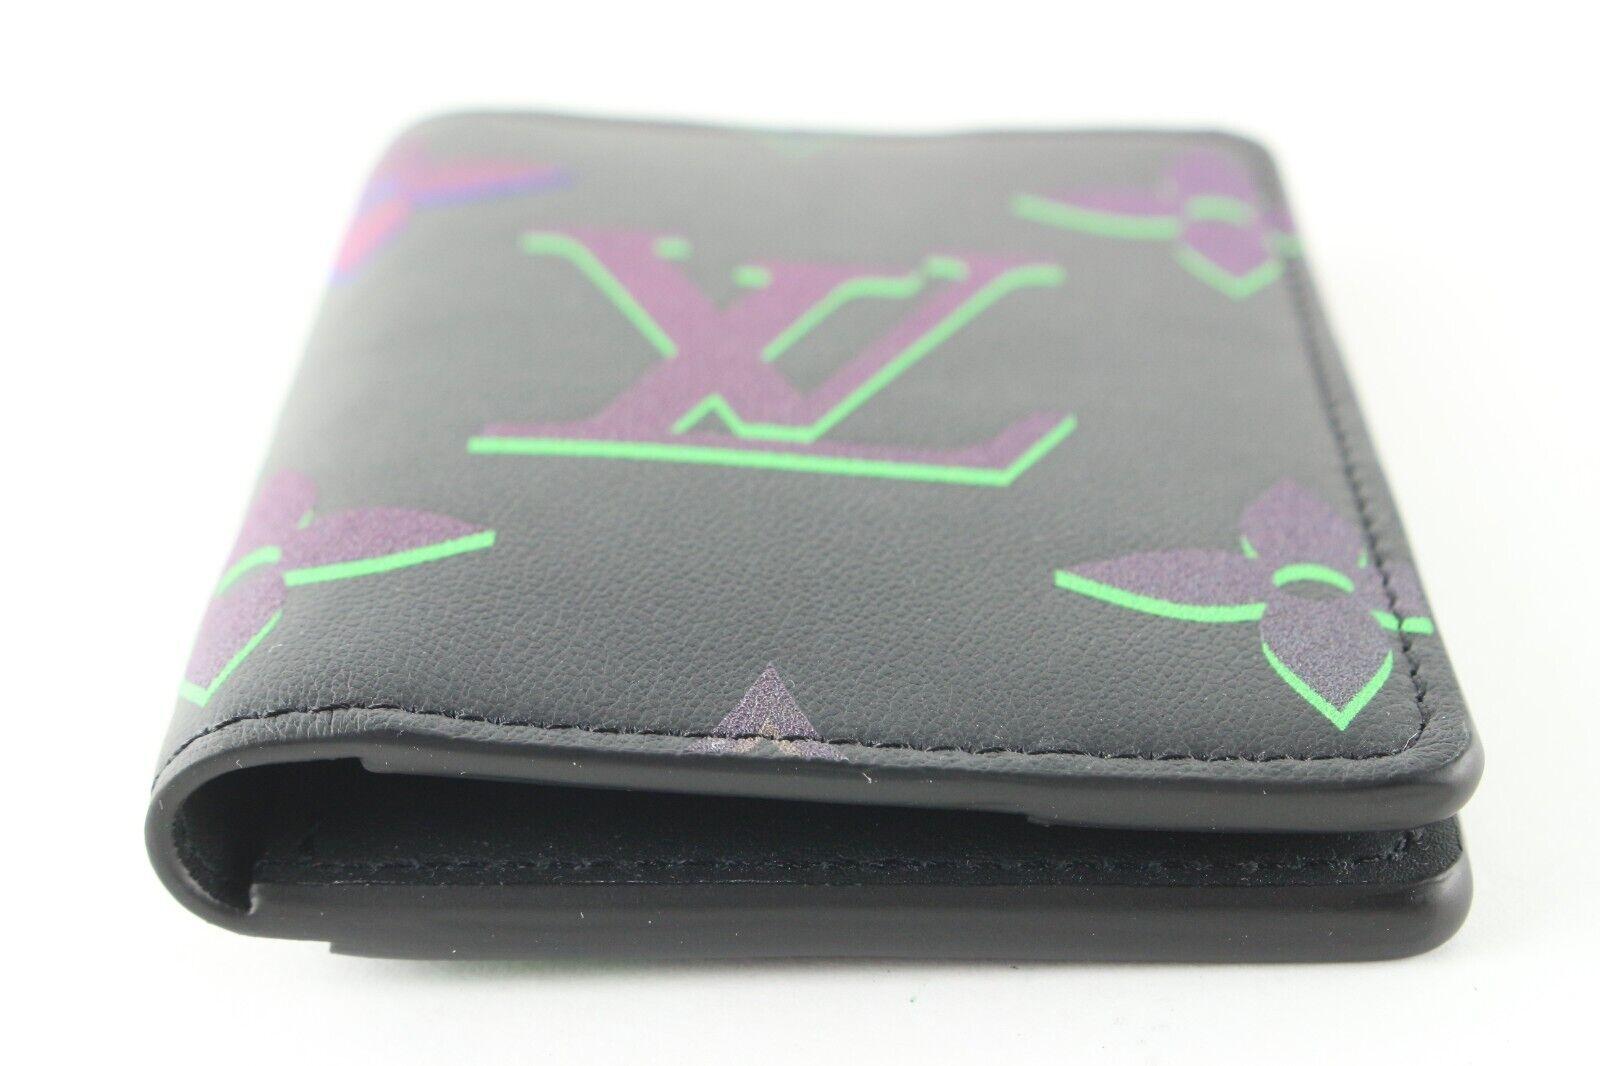 Louis Vuitton Black Leather Monogram Spotlight Pocket Organizer Wallet 4LV517S In New Condition For Sale In Dix hills, NY